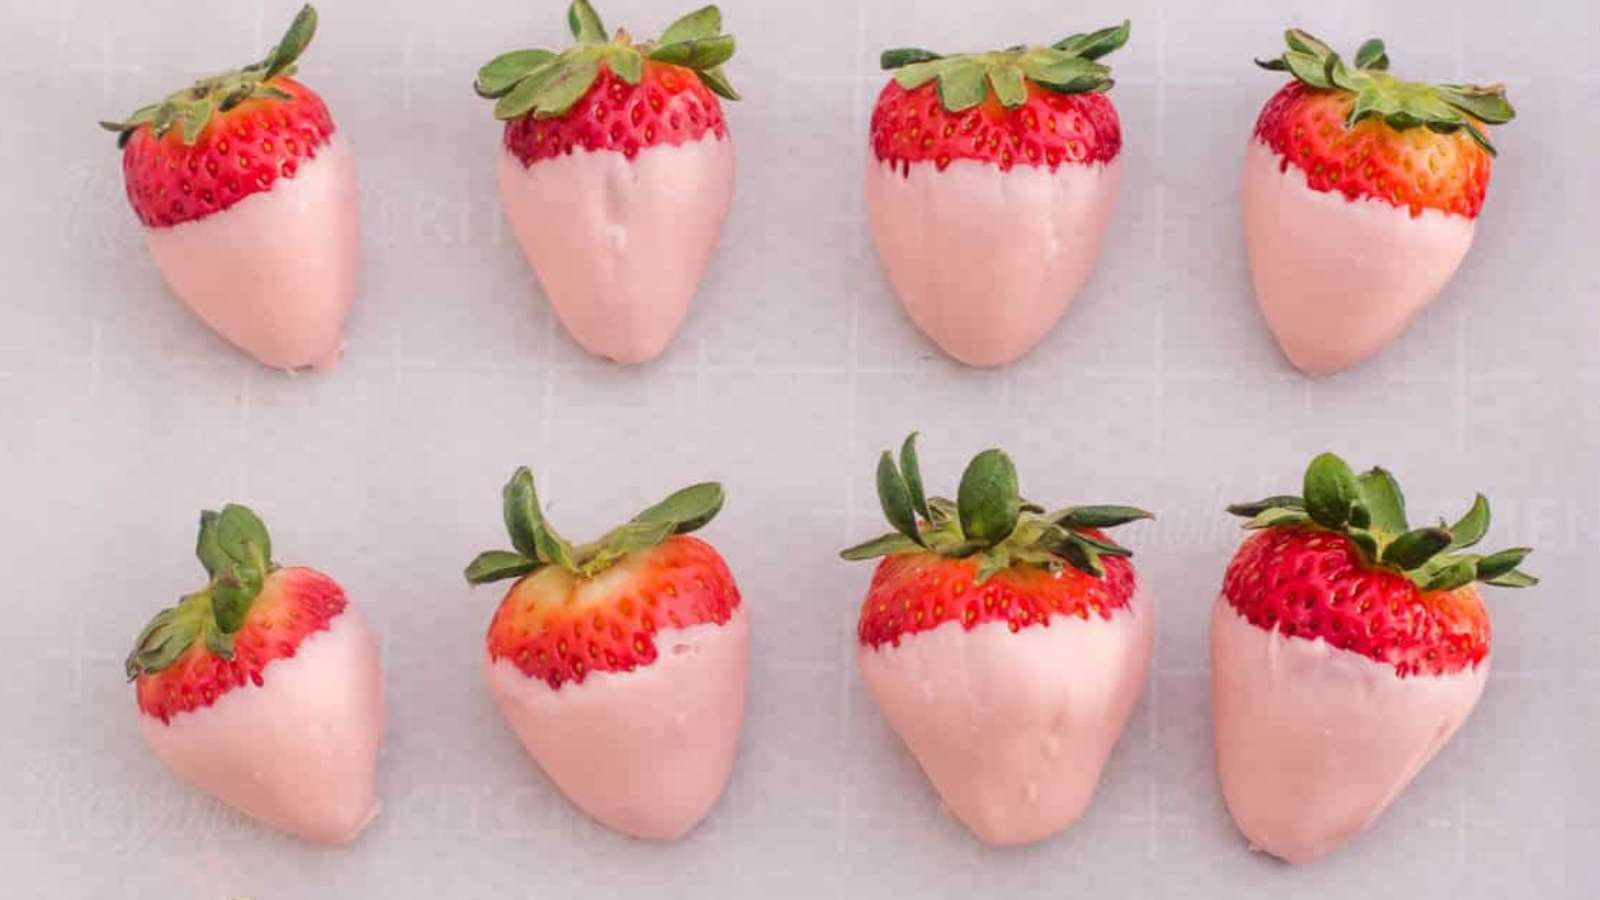 A group of pink strawberries are arranged on a white surface.